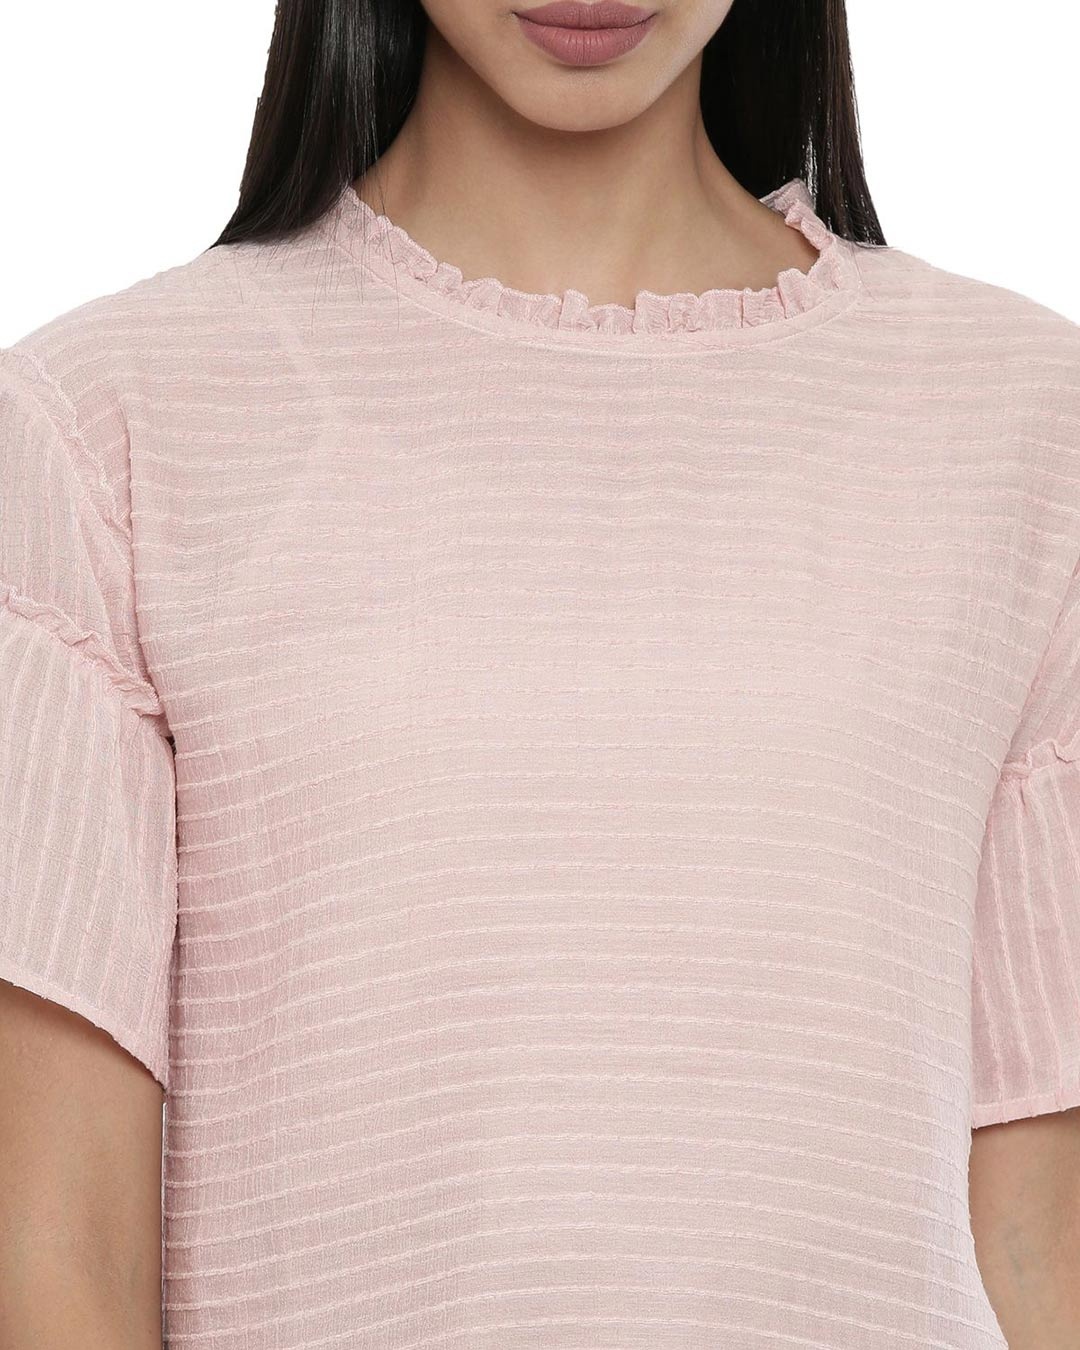 Shop Mountain Harvest Pink Top For Women's